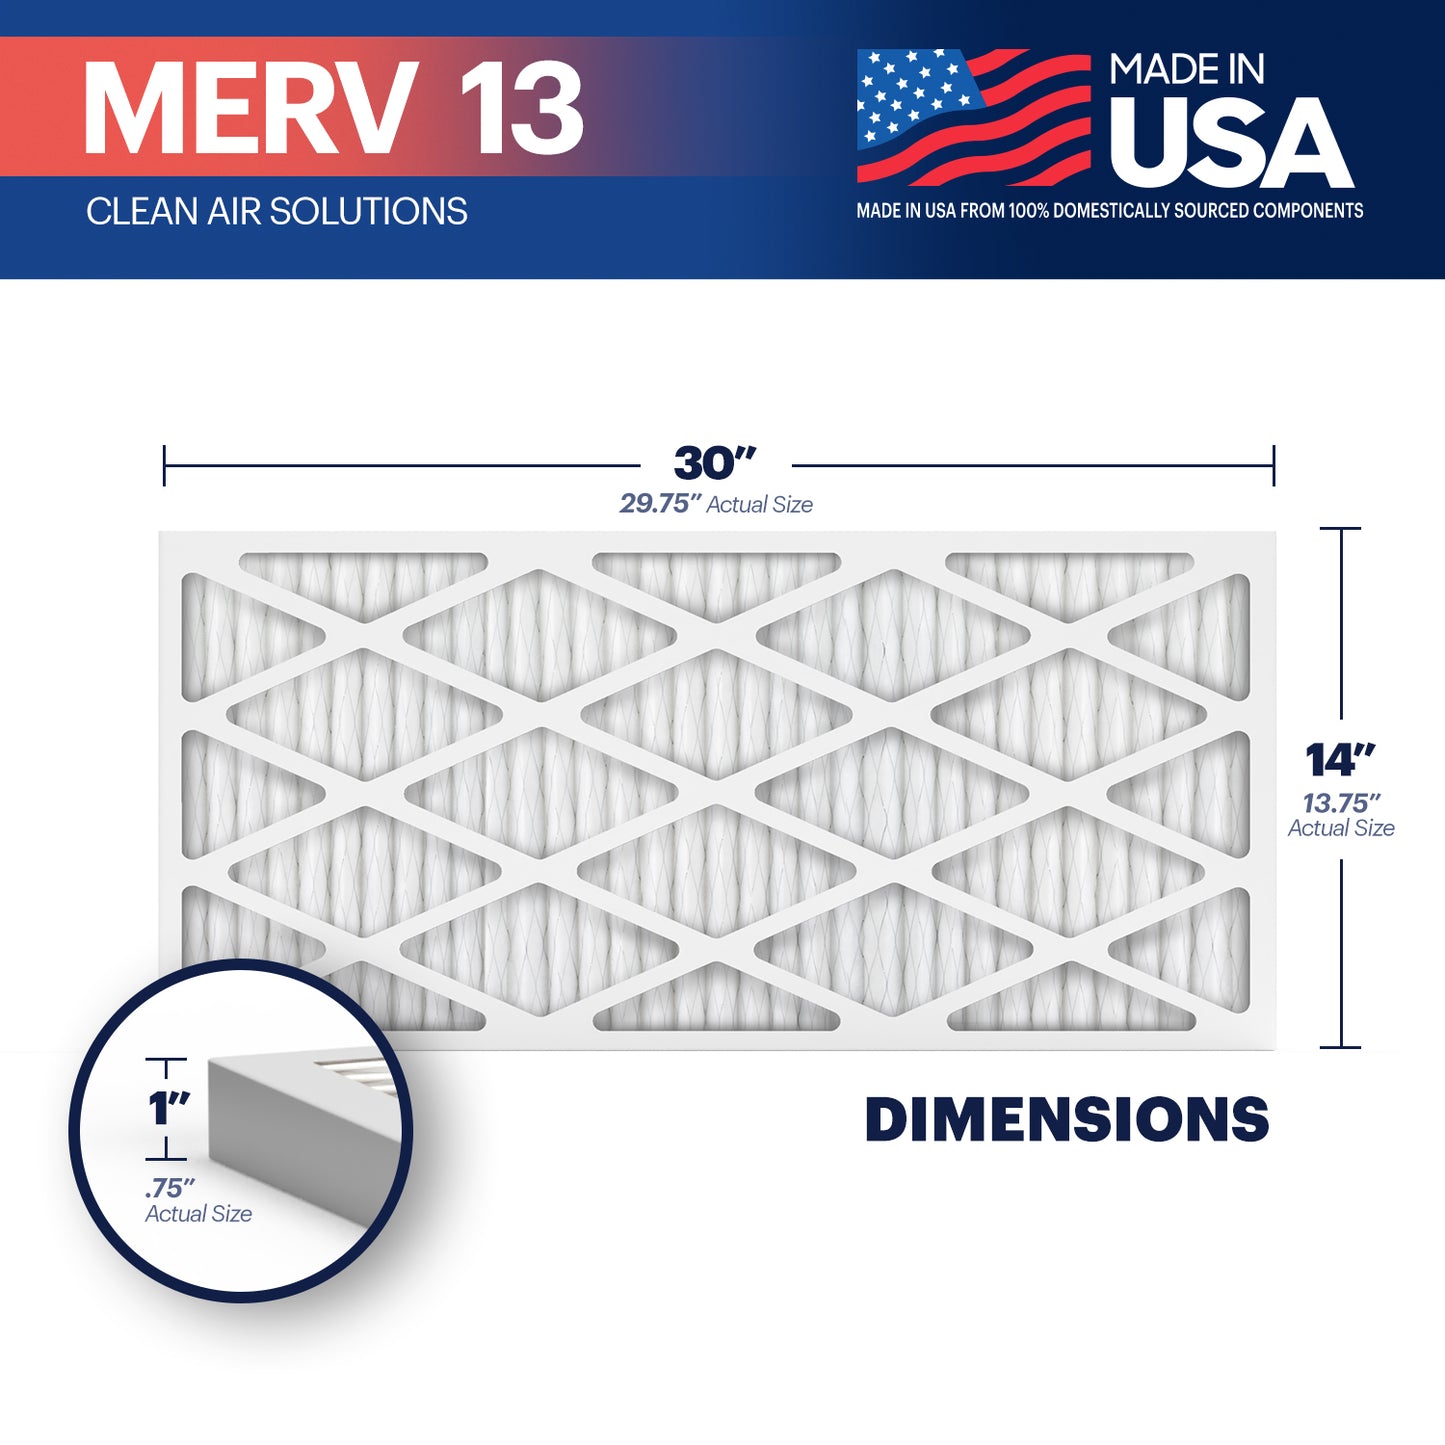 BNX 14x30x1 MERV 13 Pleated Air Filter – Made in USA (4-Pack)